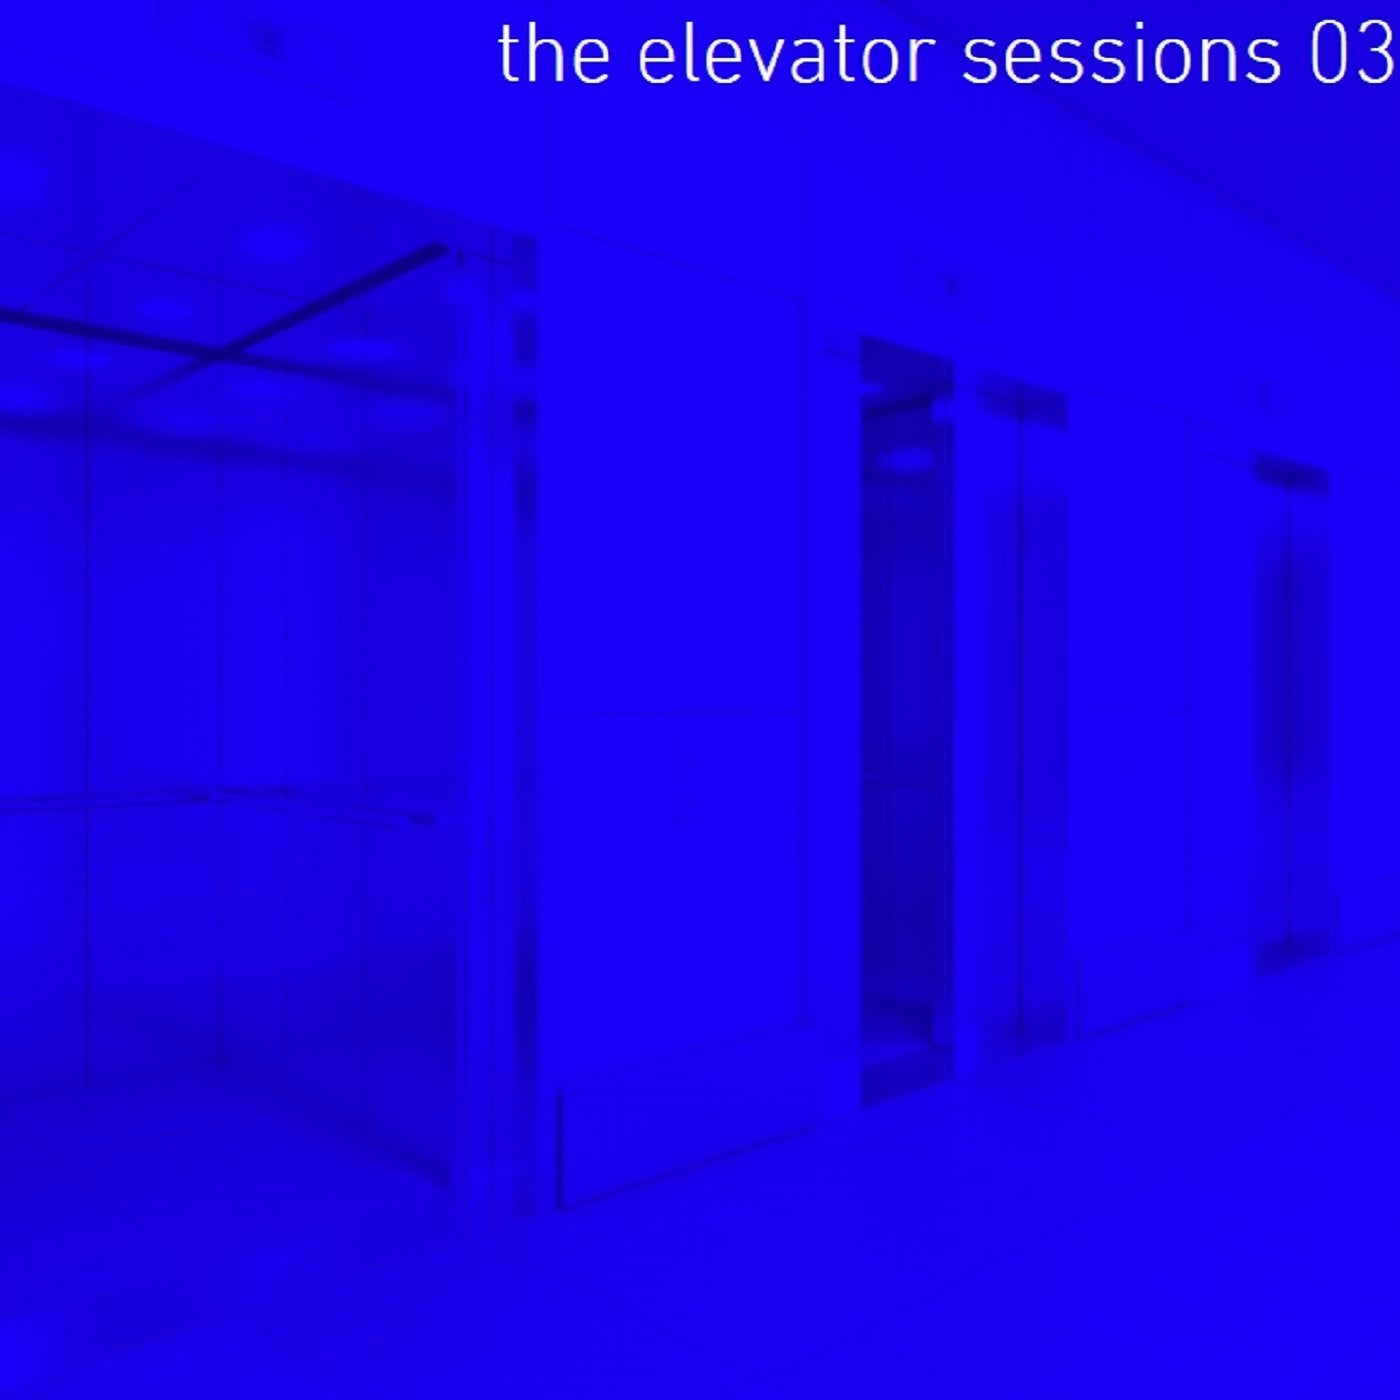 The Elevator Sessions 03 (Compiled & Mixed by Klangstein)